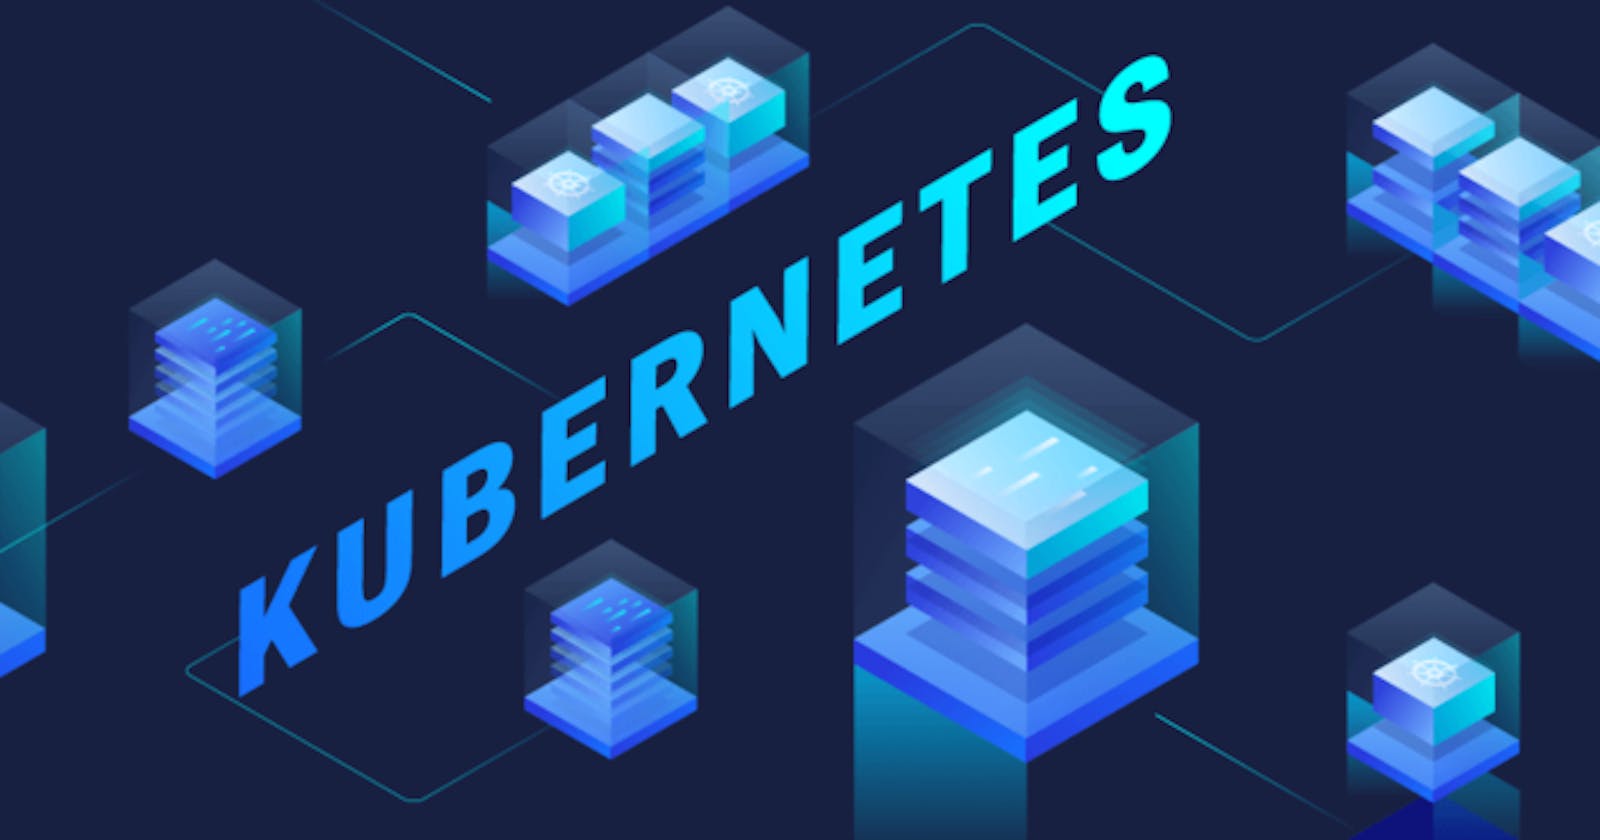 Kubernetes Overview & Architecture